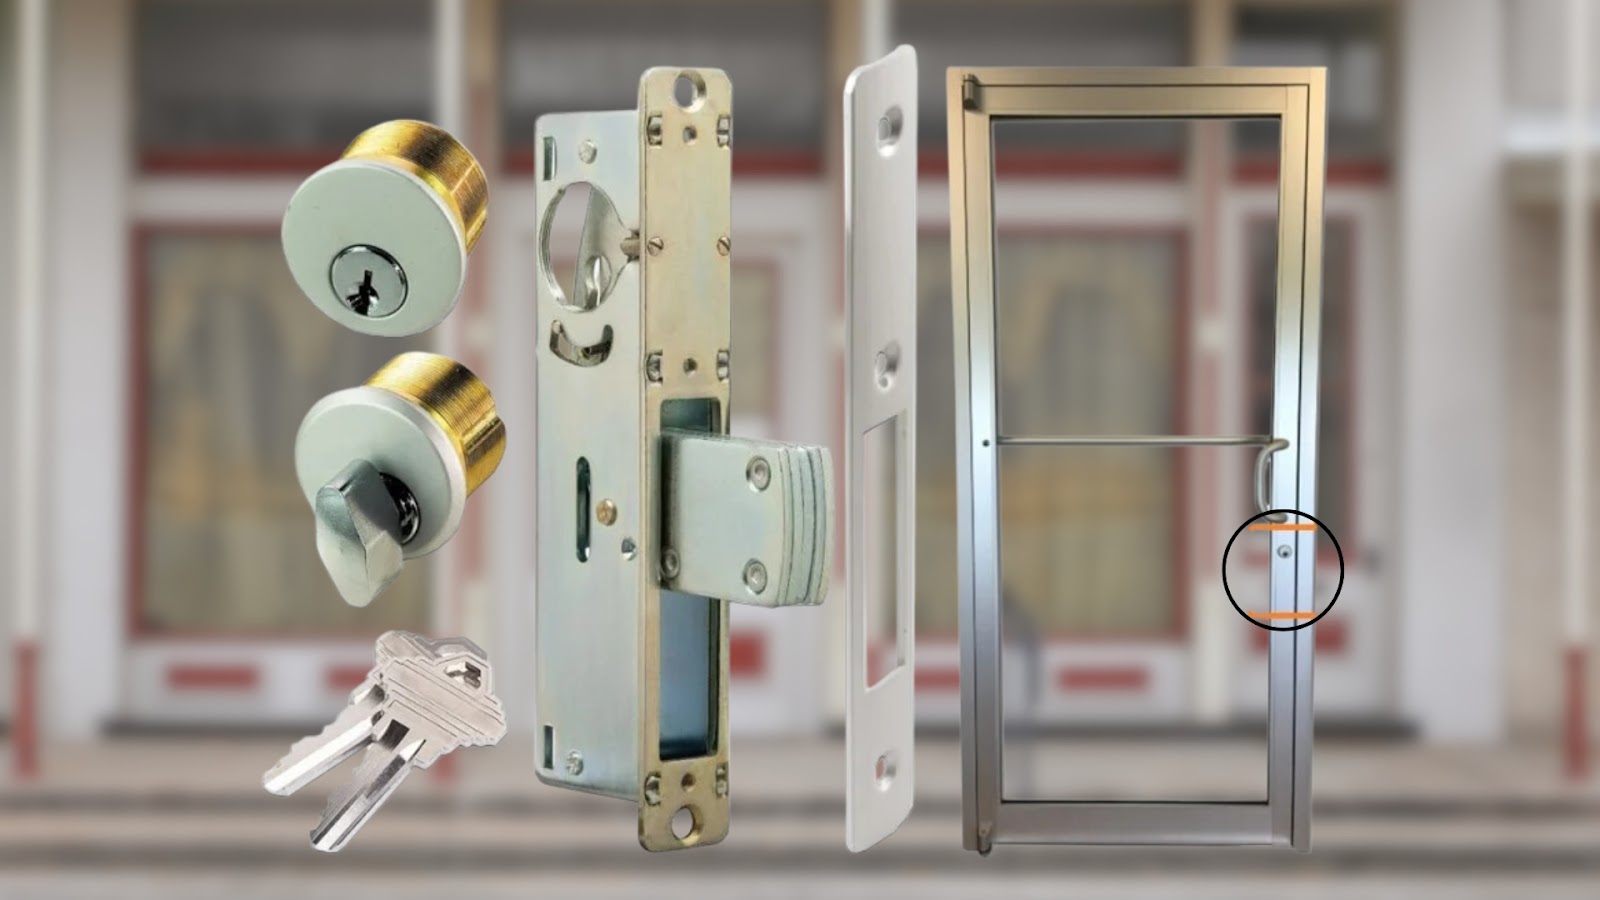 A set of high-security locks, including cylindrical locksets and a mortise lock set, is installed in a building's front door.